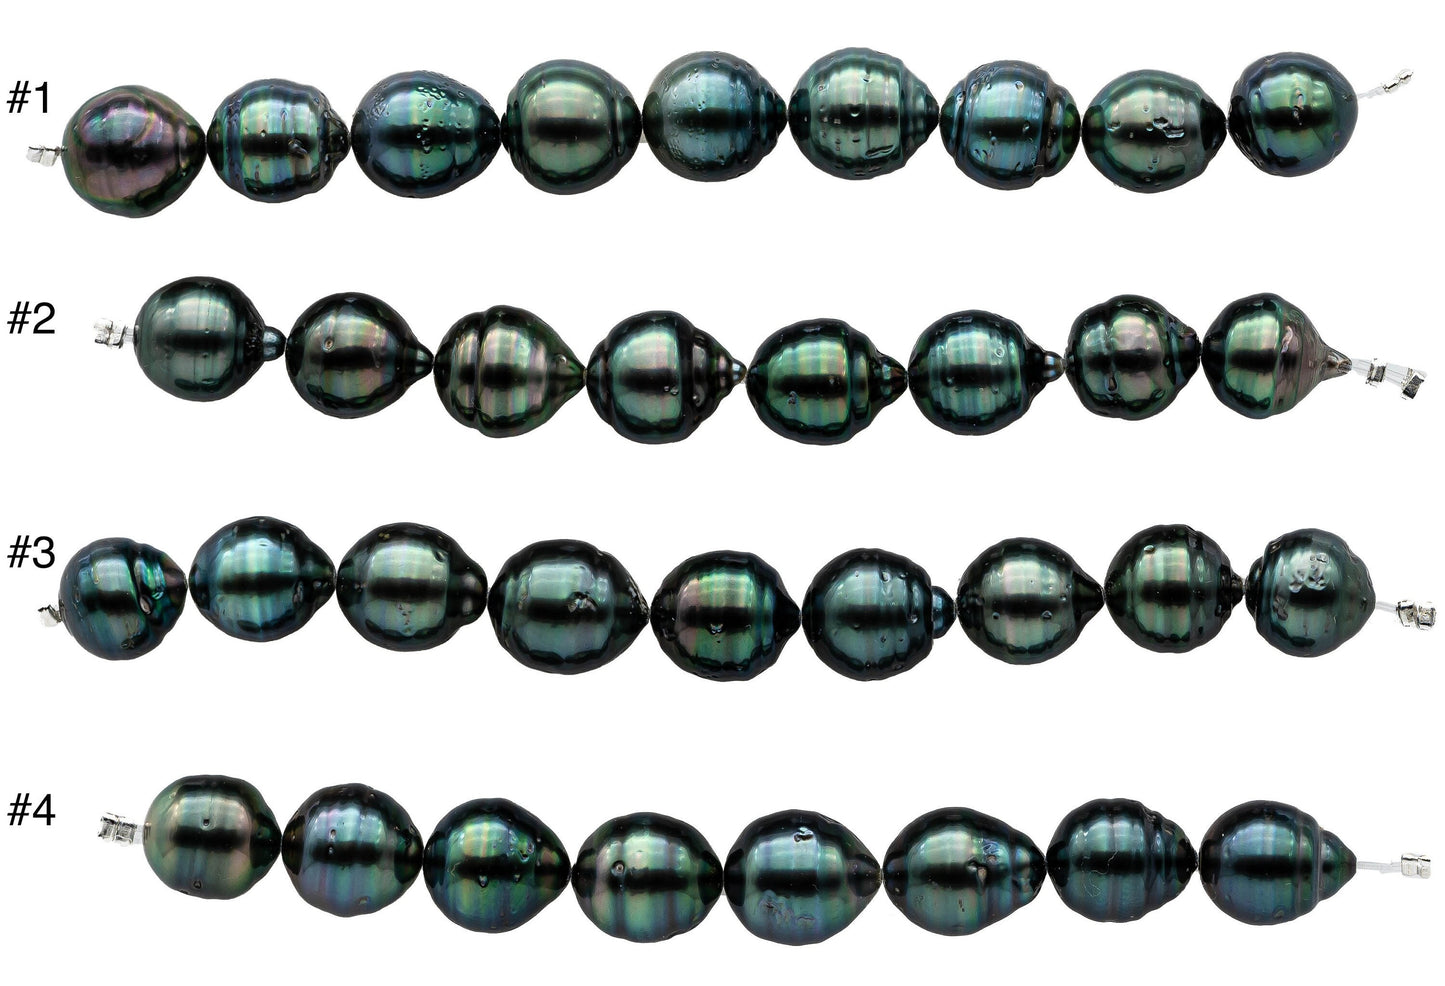 Peacock Black Tahitian Pearl Drops with Nice Luster and Blemishes, Natural Color Pearl Bead Strands in 4 Inches Long, 10-11mm SKU#1104TH